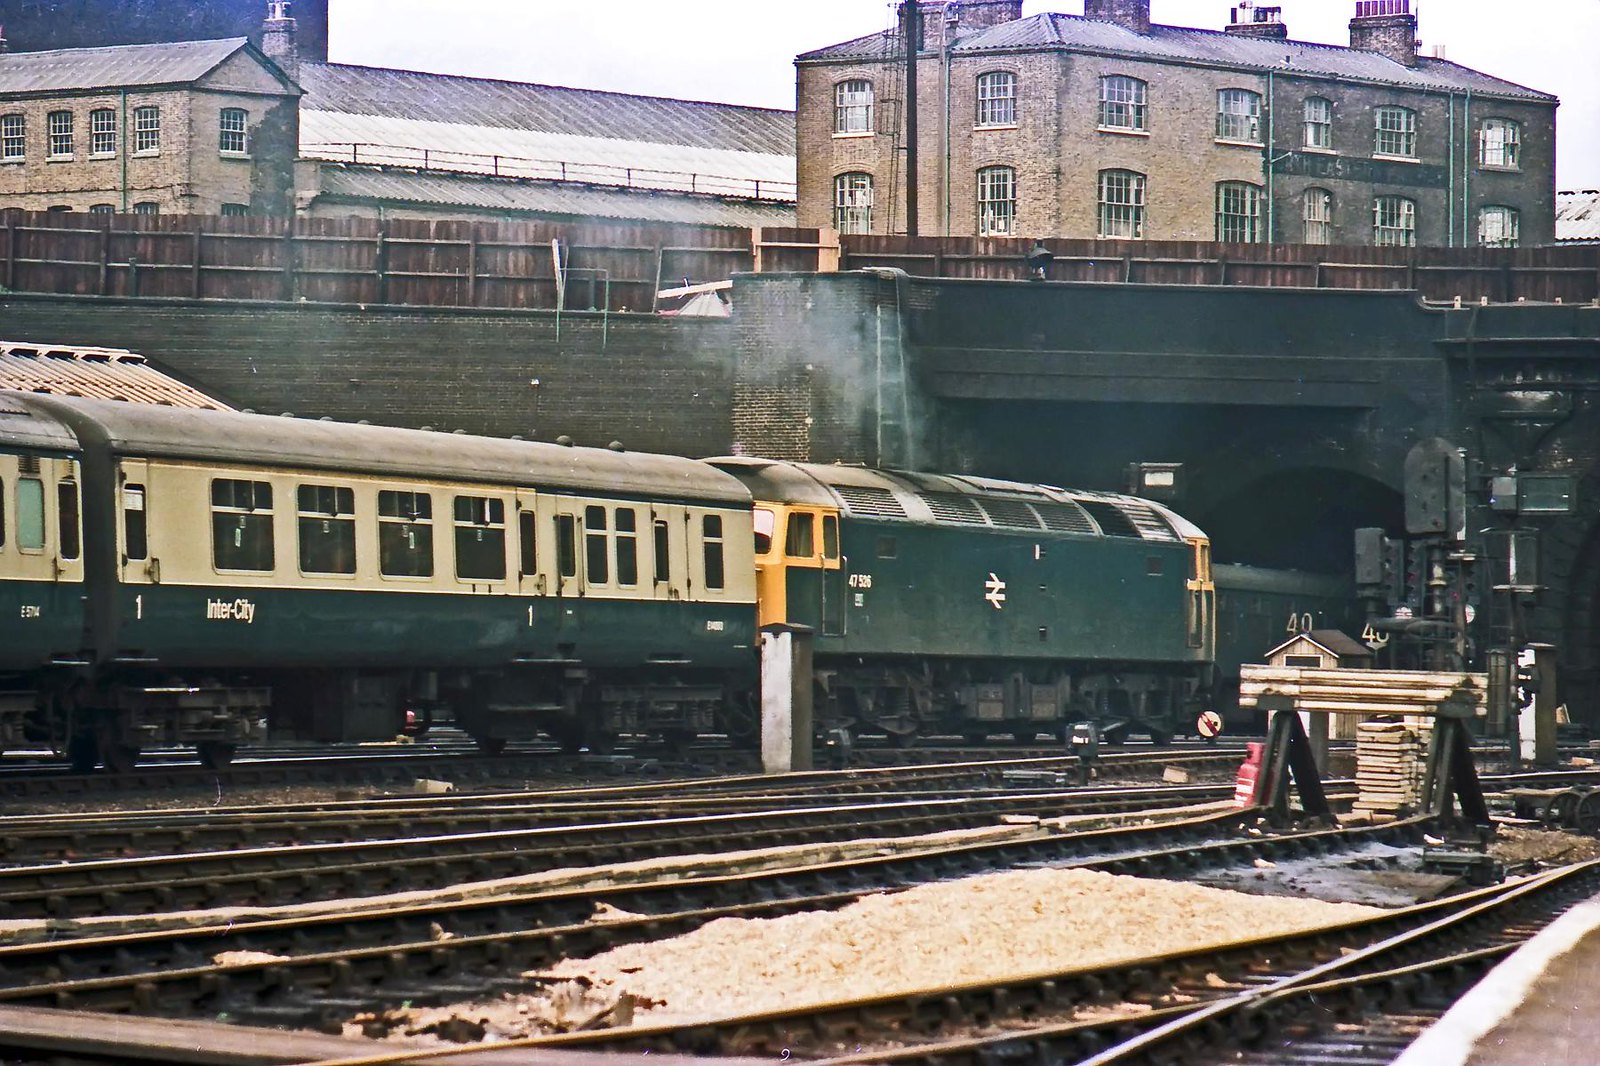 Brush Type 4 No. 47526 enters Gasworks tunnel as it departs from Kings Cross with the 14-20 train for Leeds on 19th April 1975.